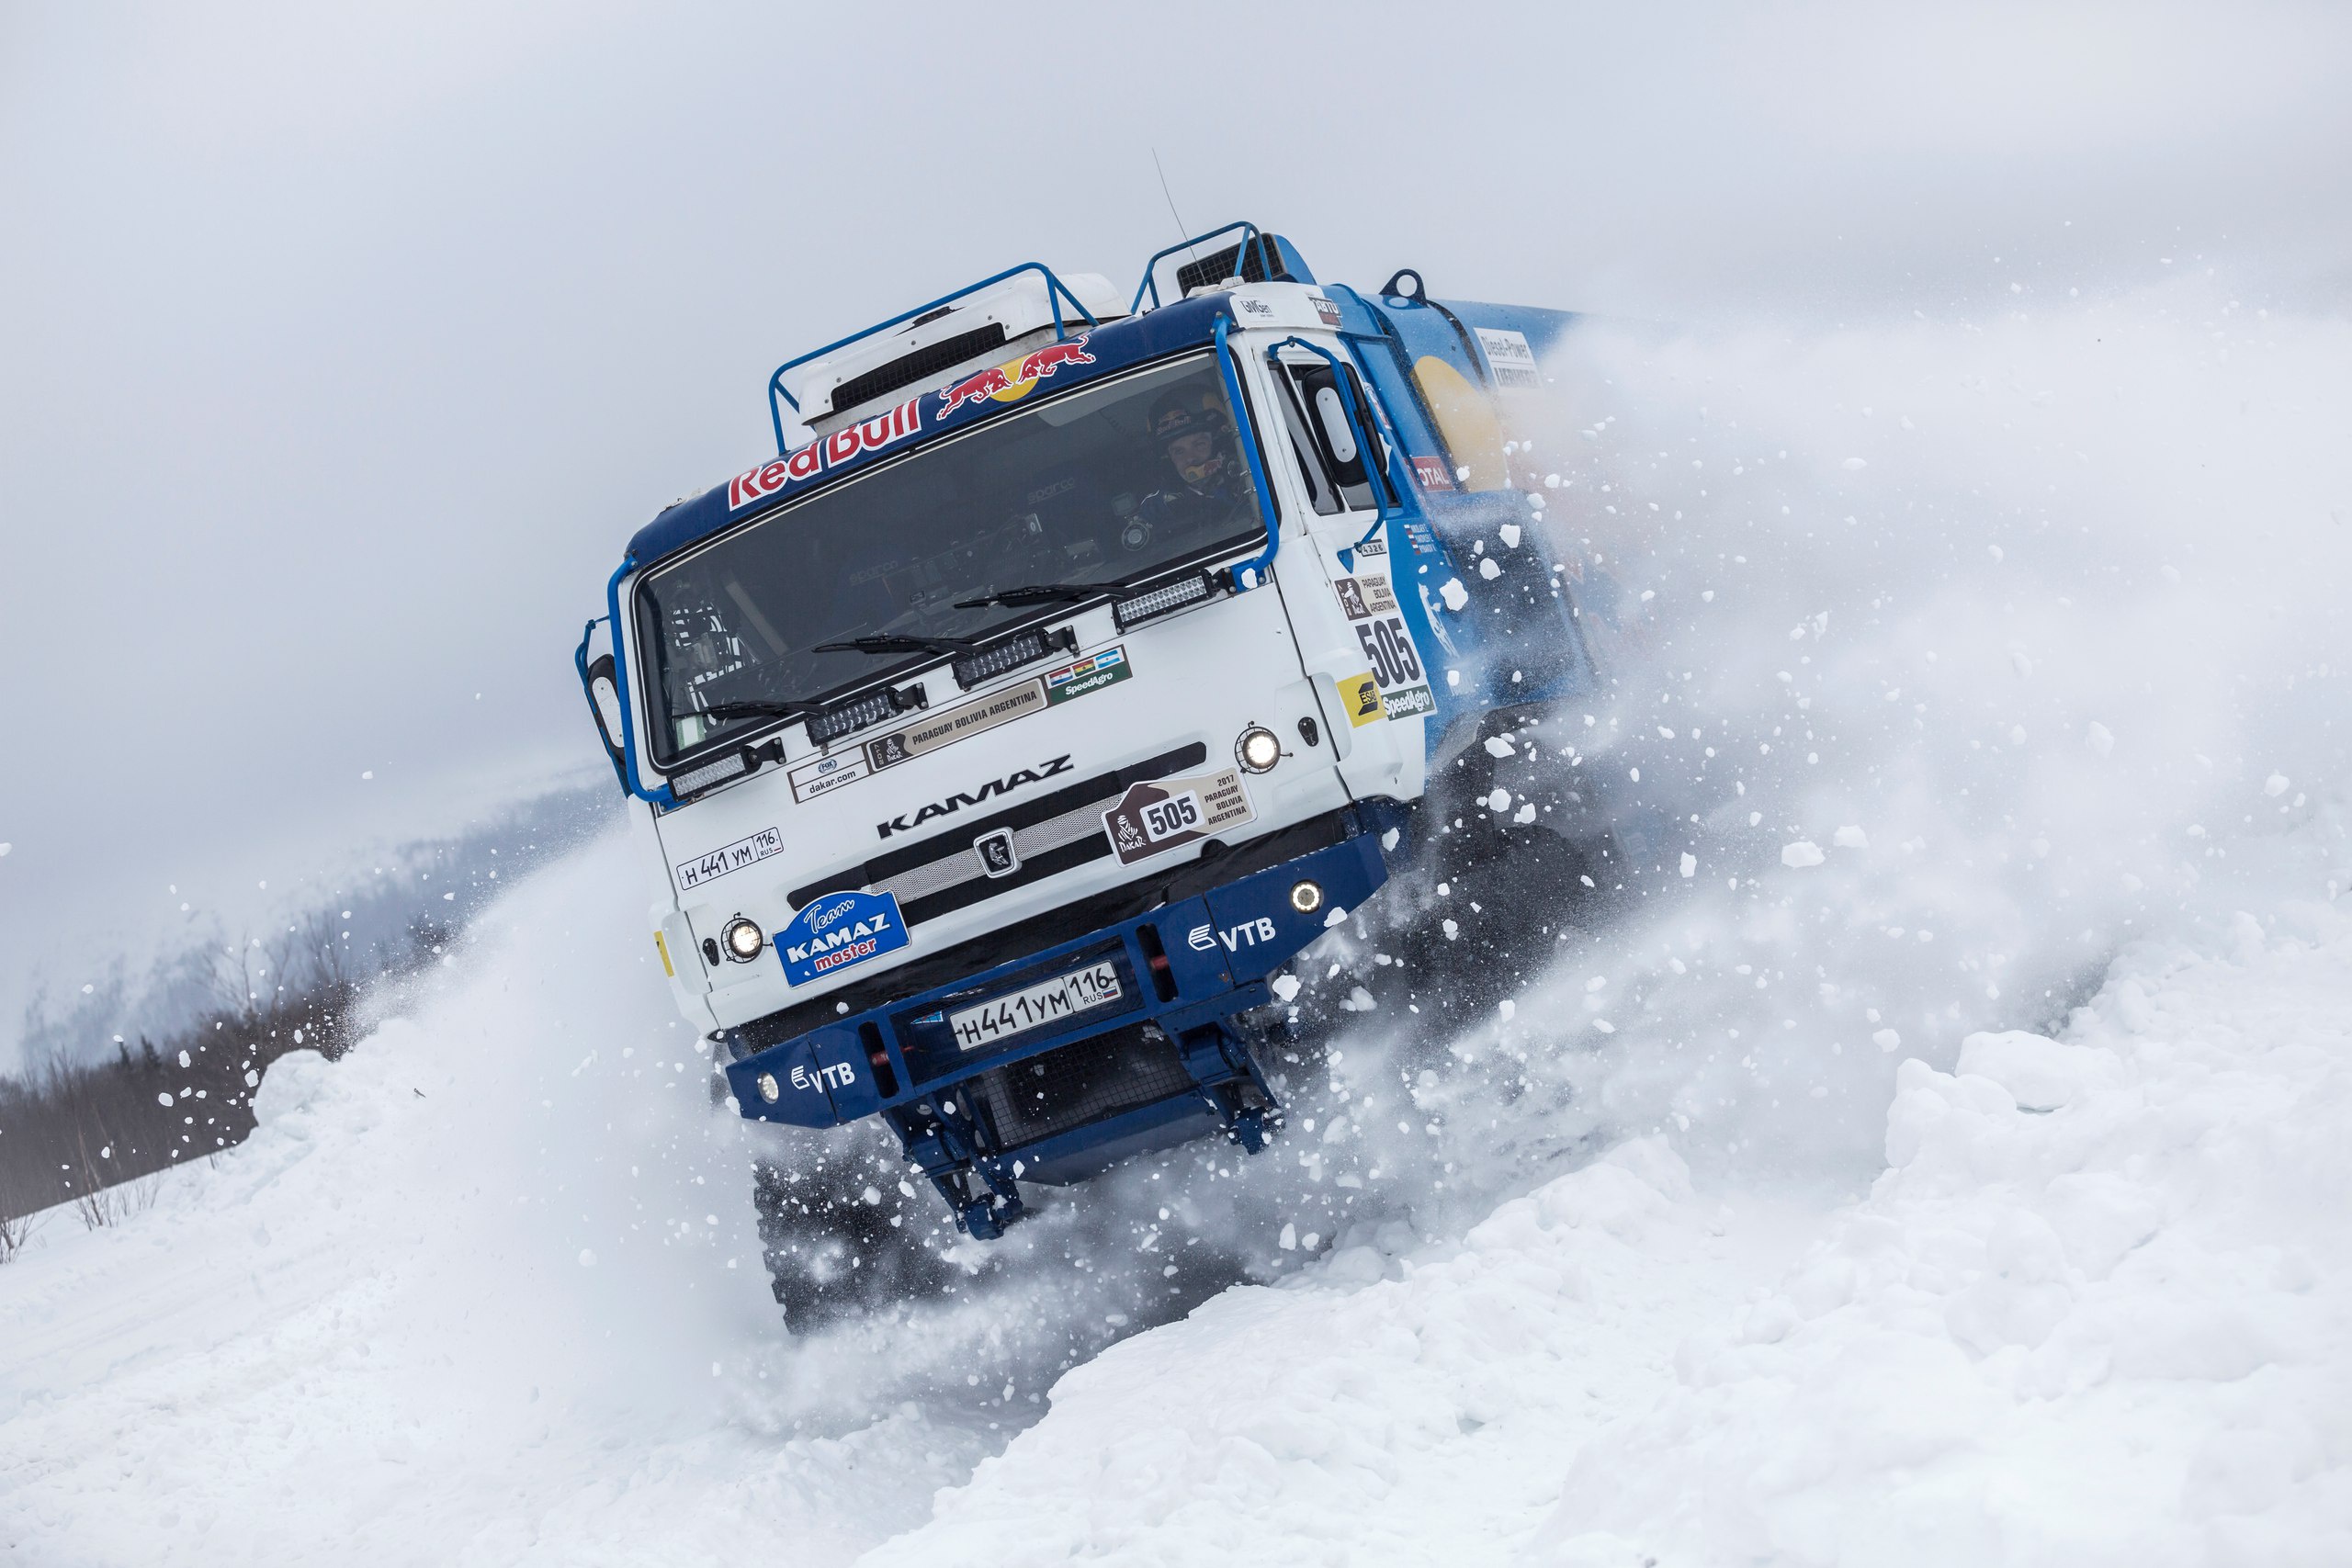 General 2560x1707 snow truck racing Rally vehicle Kamaz motorsport sport cold ice outdoors numbers Red Bull Racing Russian trucks